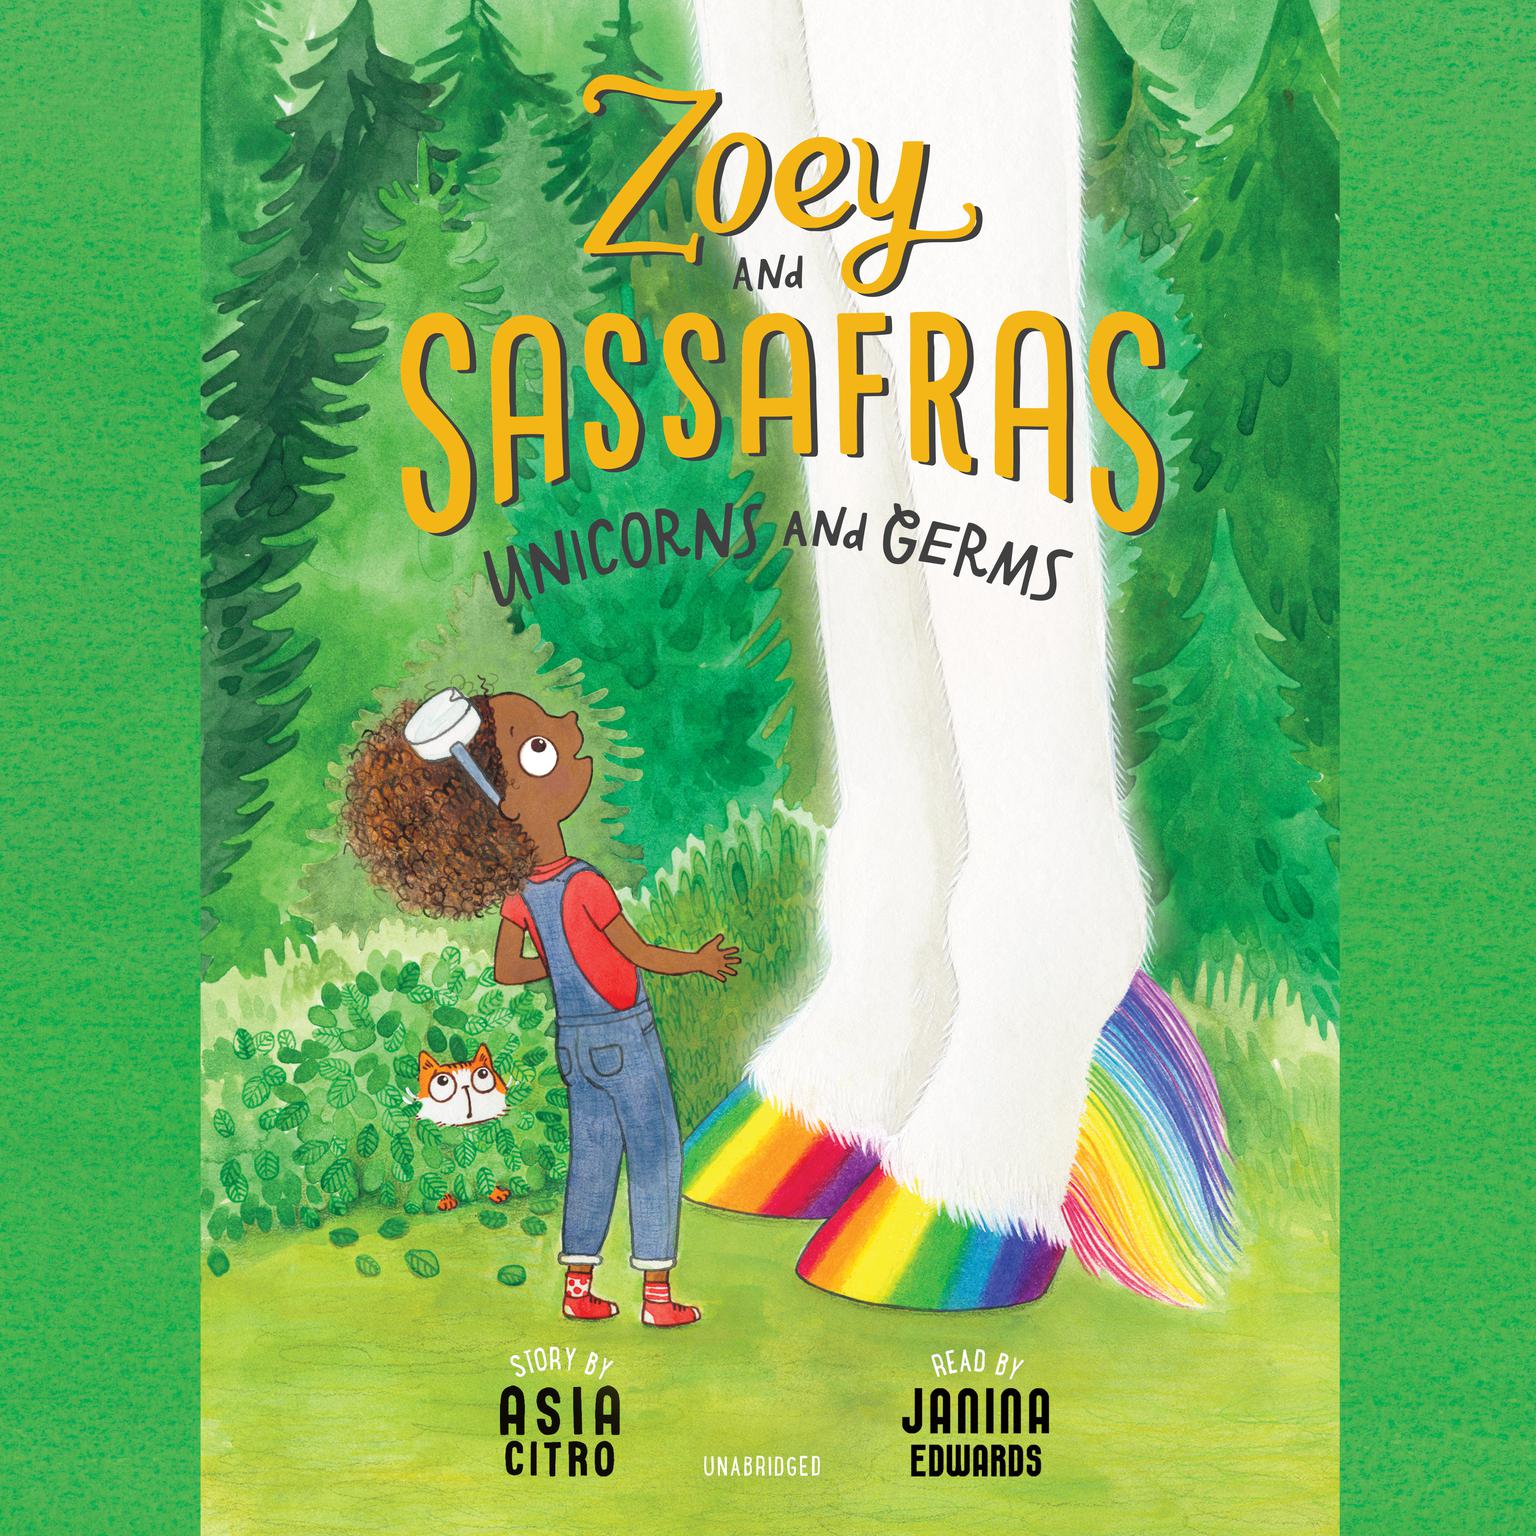 Zoey and Sassafras: Unicorns and Germs Audiobook, by Asia Citro